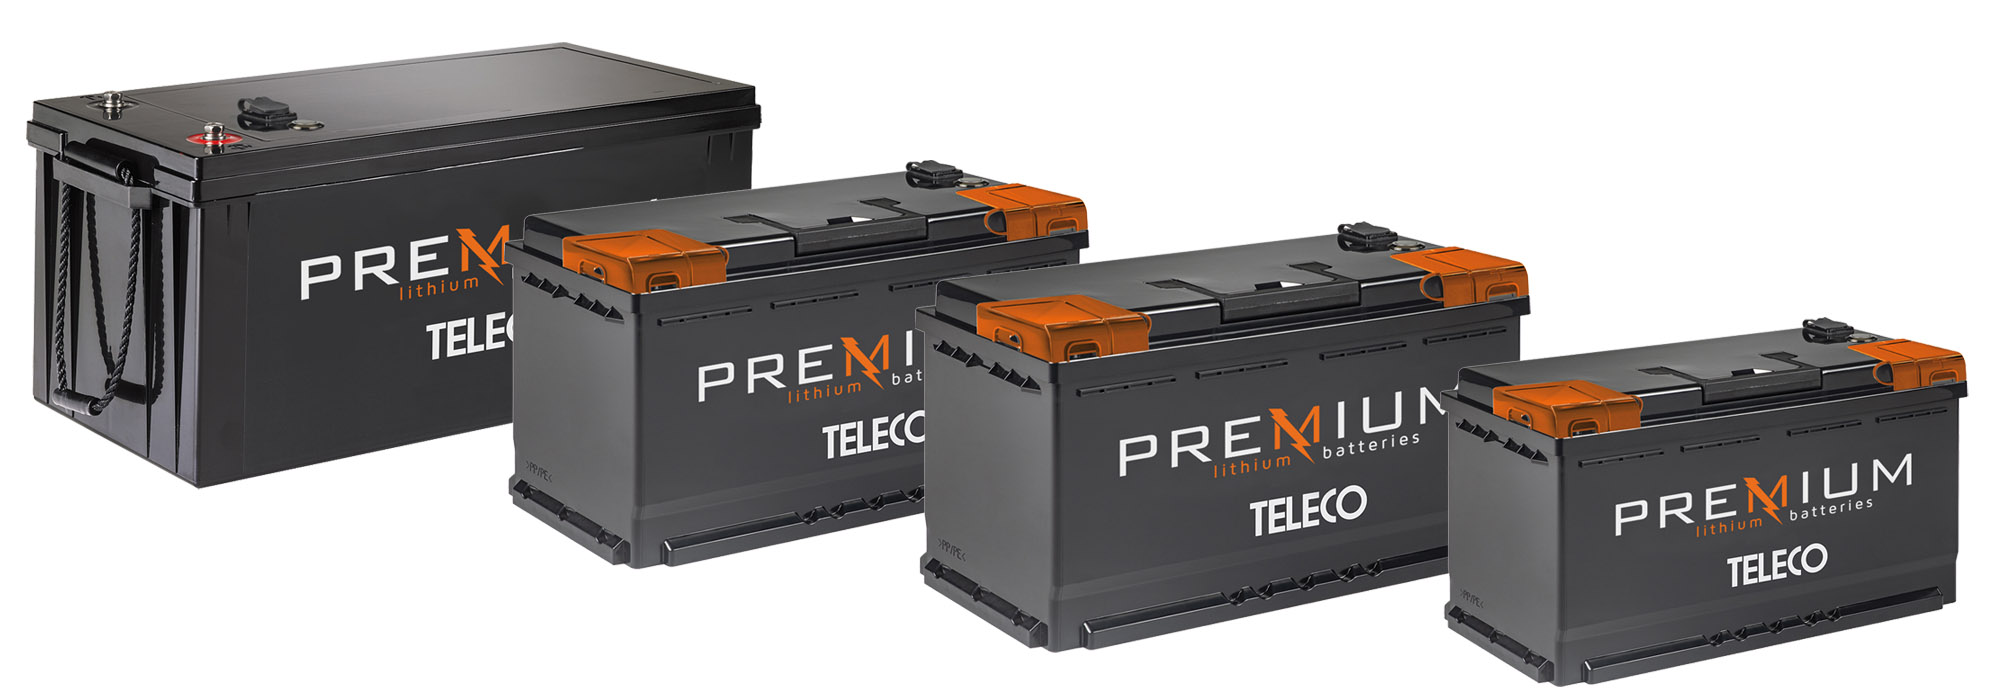 New Telair TLI Premium lithium batteries: uncompromising quality, durability and performance